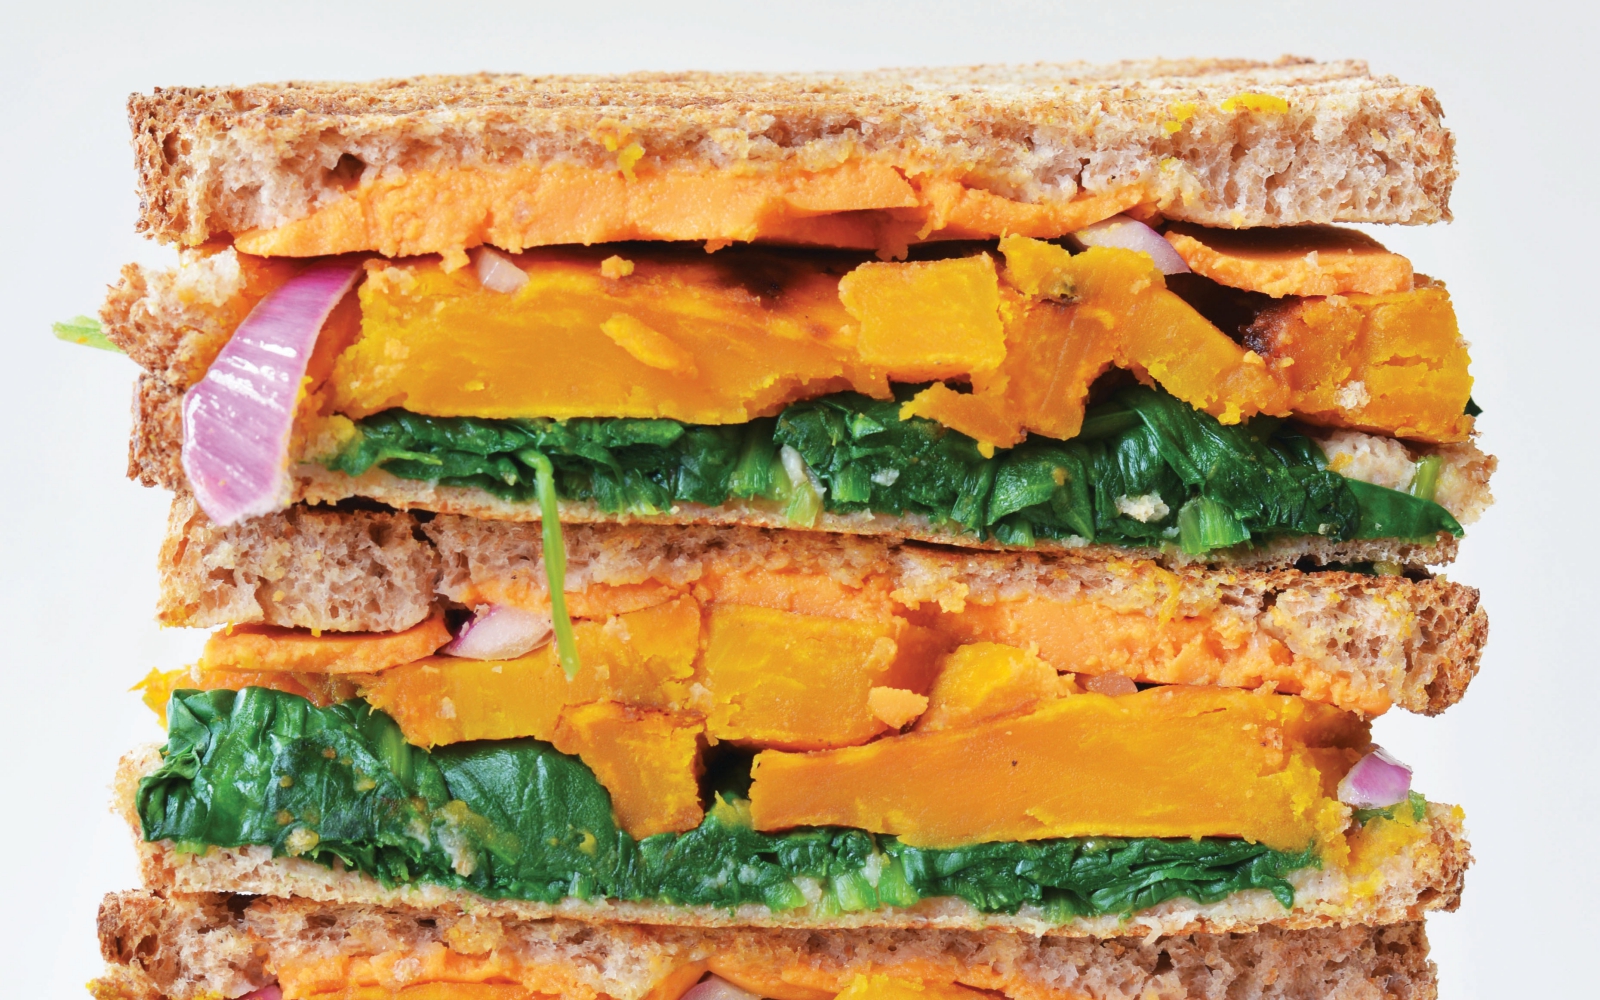 Vegan Maple-Mustard Squash Grilled Cheese with greens and onion